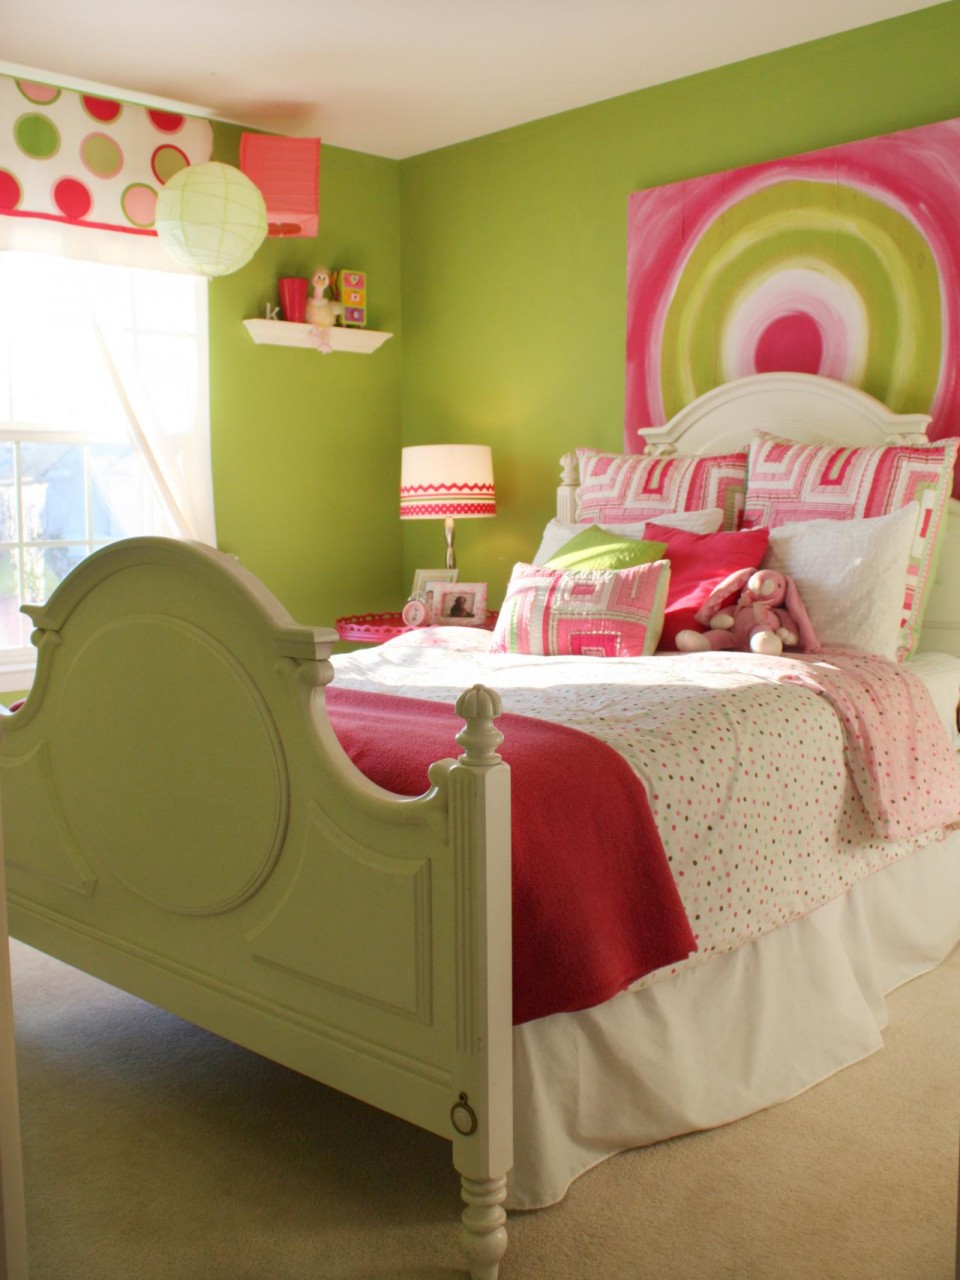 RMS_KristianArt-pink-and-green-girls-room_s3x4.jpg.rend.hgtvcom.1280.1707